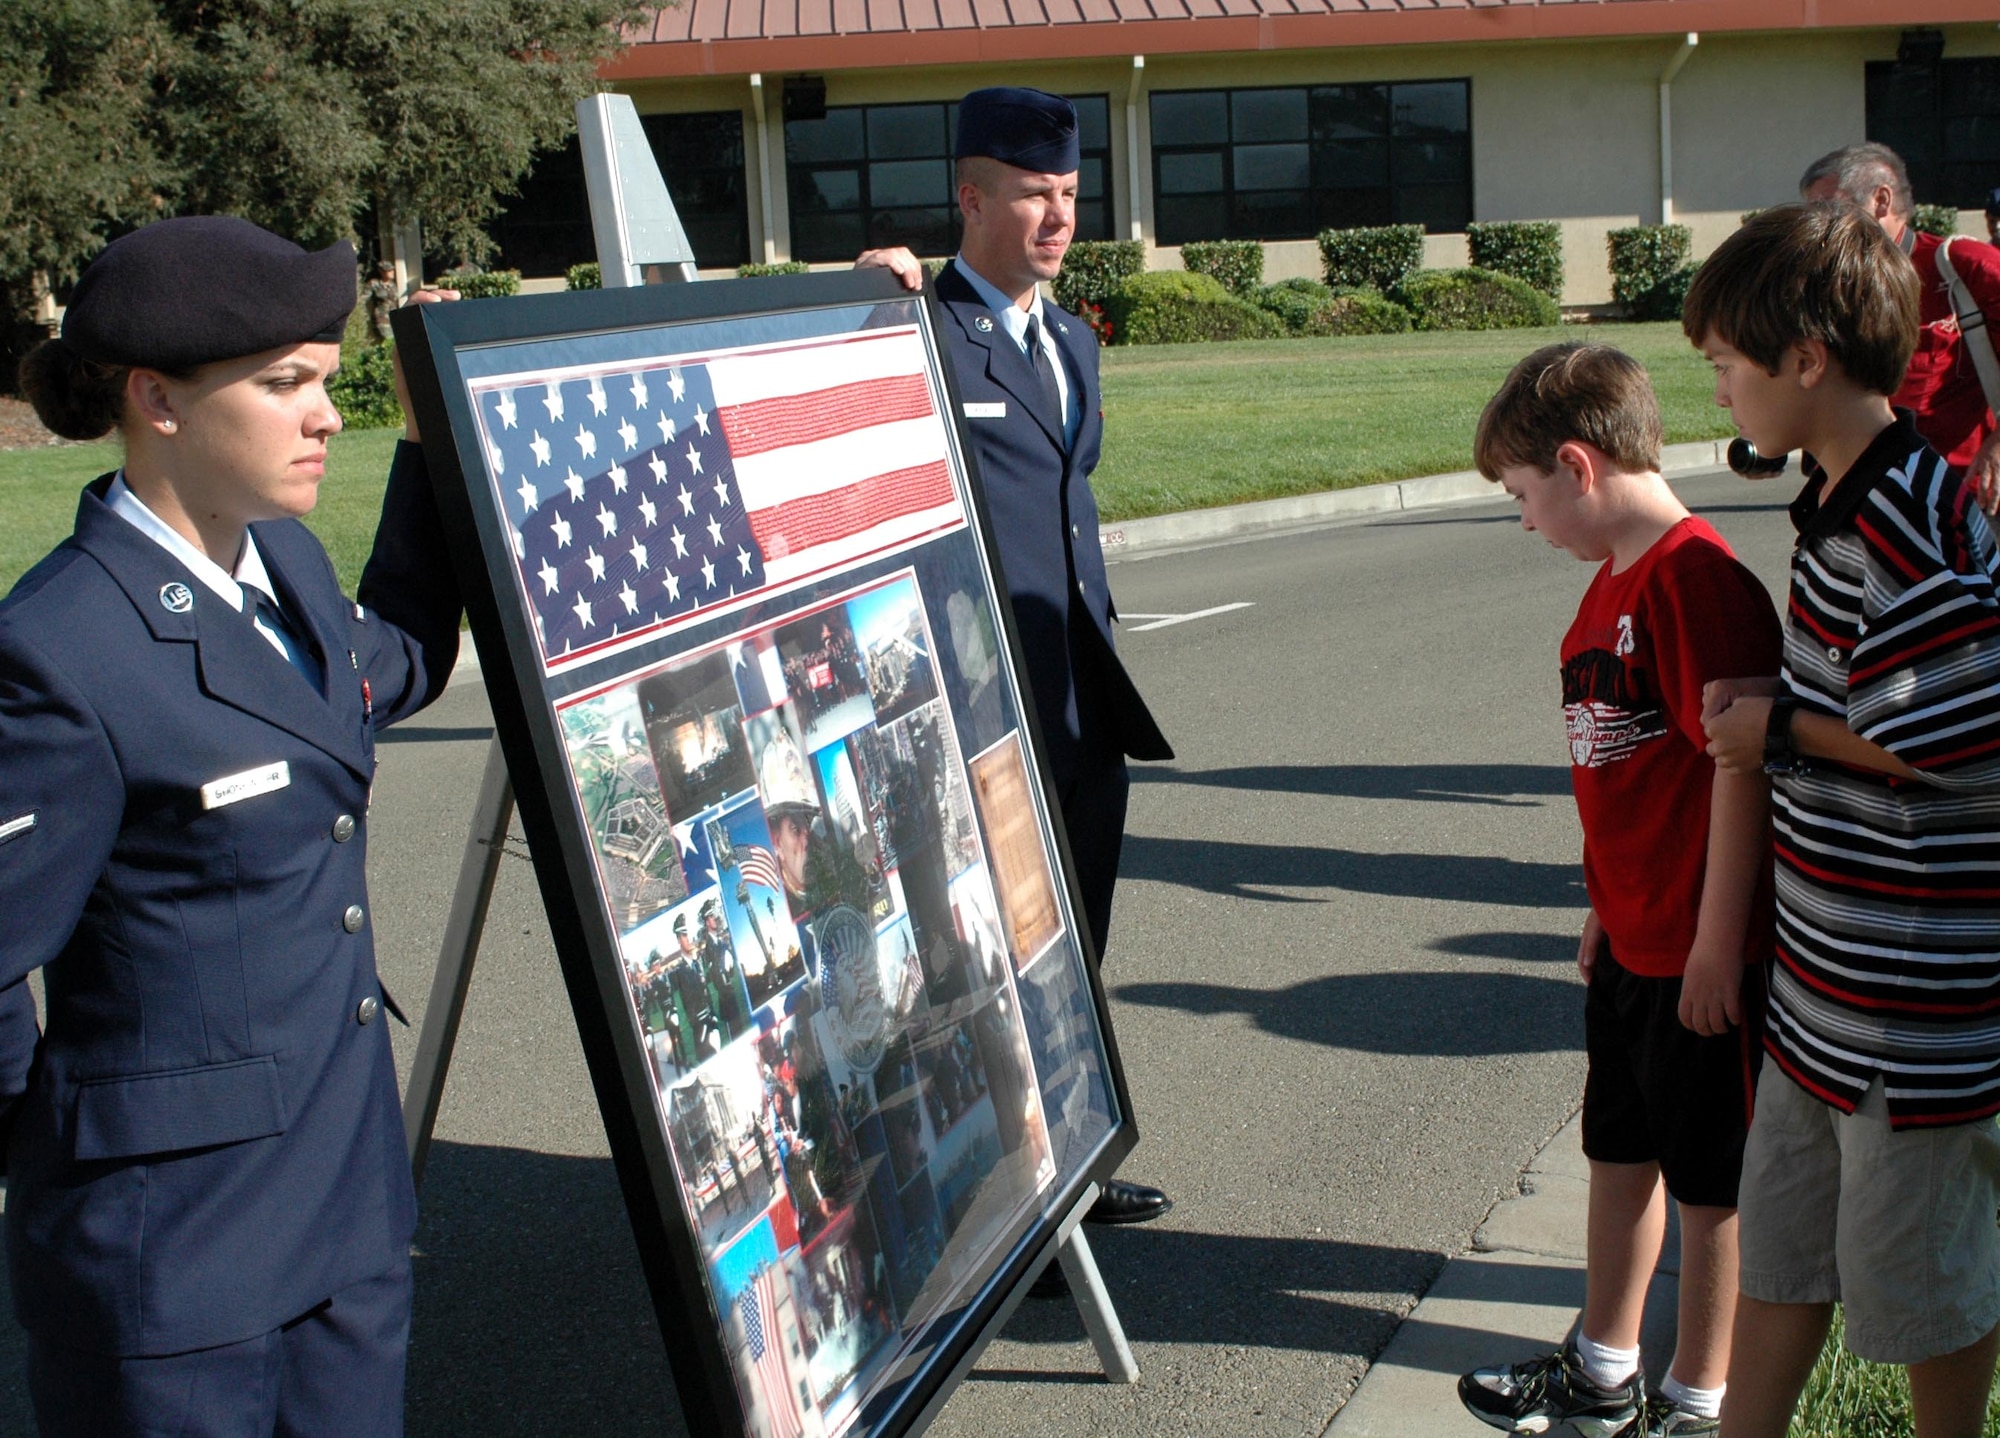 Stevie Arquiette, (second from right), son of Col. Steve Arquiette, 60th Air Mobility Wing commander, and Nicholas Tuck, son of Col. G. I. Tuck, 60th Air Mobility Wing vice commander, view the Sept. 11, 2001 memorial plaque. The plaque holds a memorial flag which list all the names of the individuals who lost their lives on Sept. 11, 2001. (U.S. Air Force photo/Staff Sgt. Candy Knight)